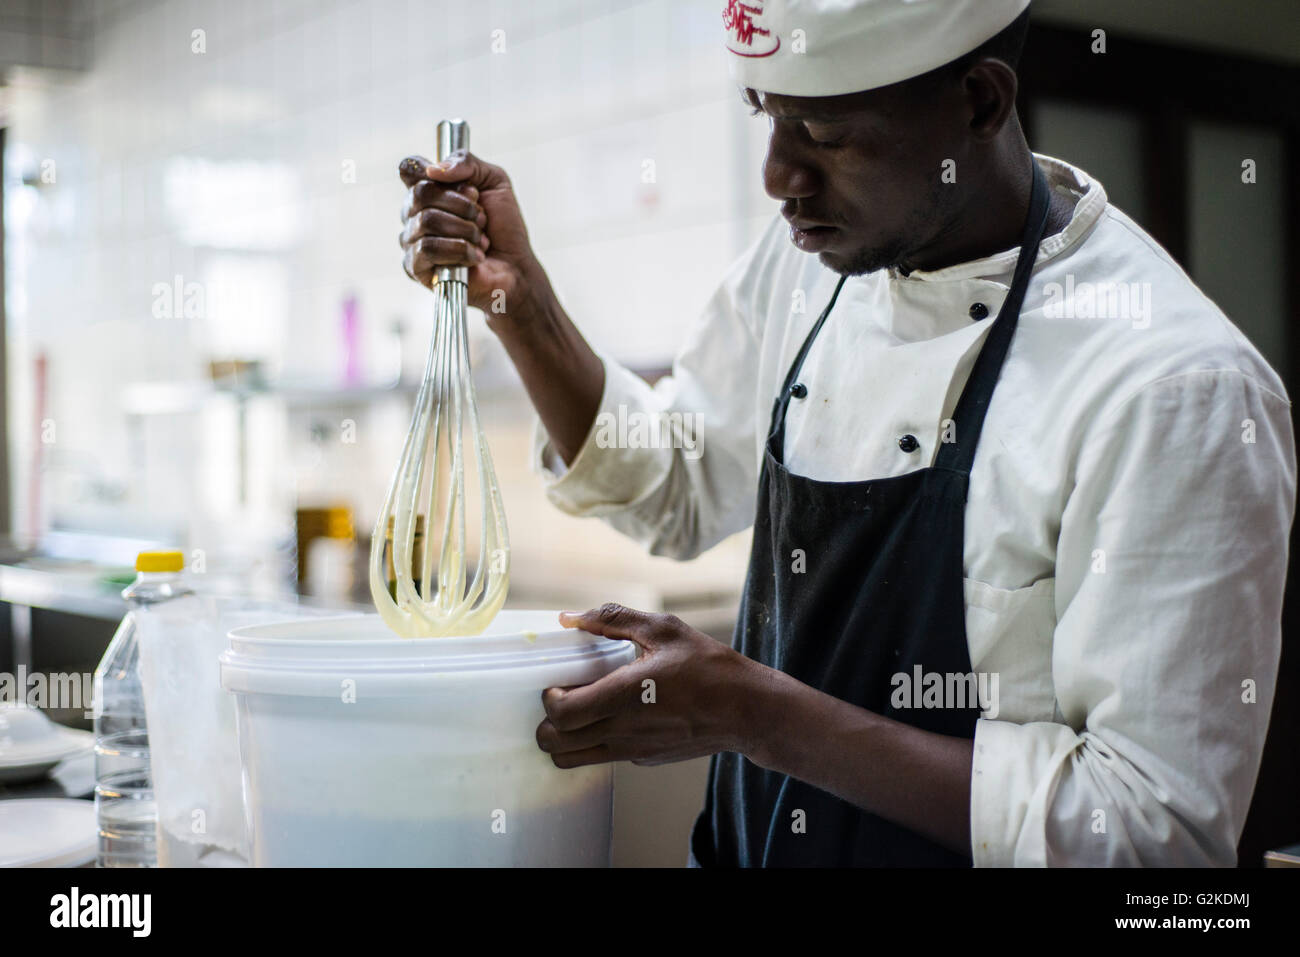 Chefs prepare dishes for lunch at NICE restaurant, Windhoek, Namibia. They start work at 7 o’clock in the morning to be ready for opening at 12 p.m. Chefs make soups, prepare vegetables and snacks, cut basic ingredients for salads. Stock Photo